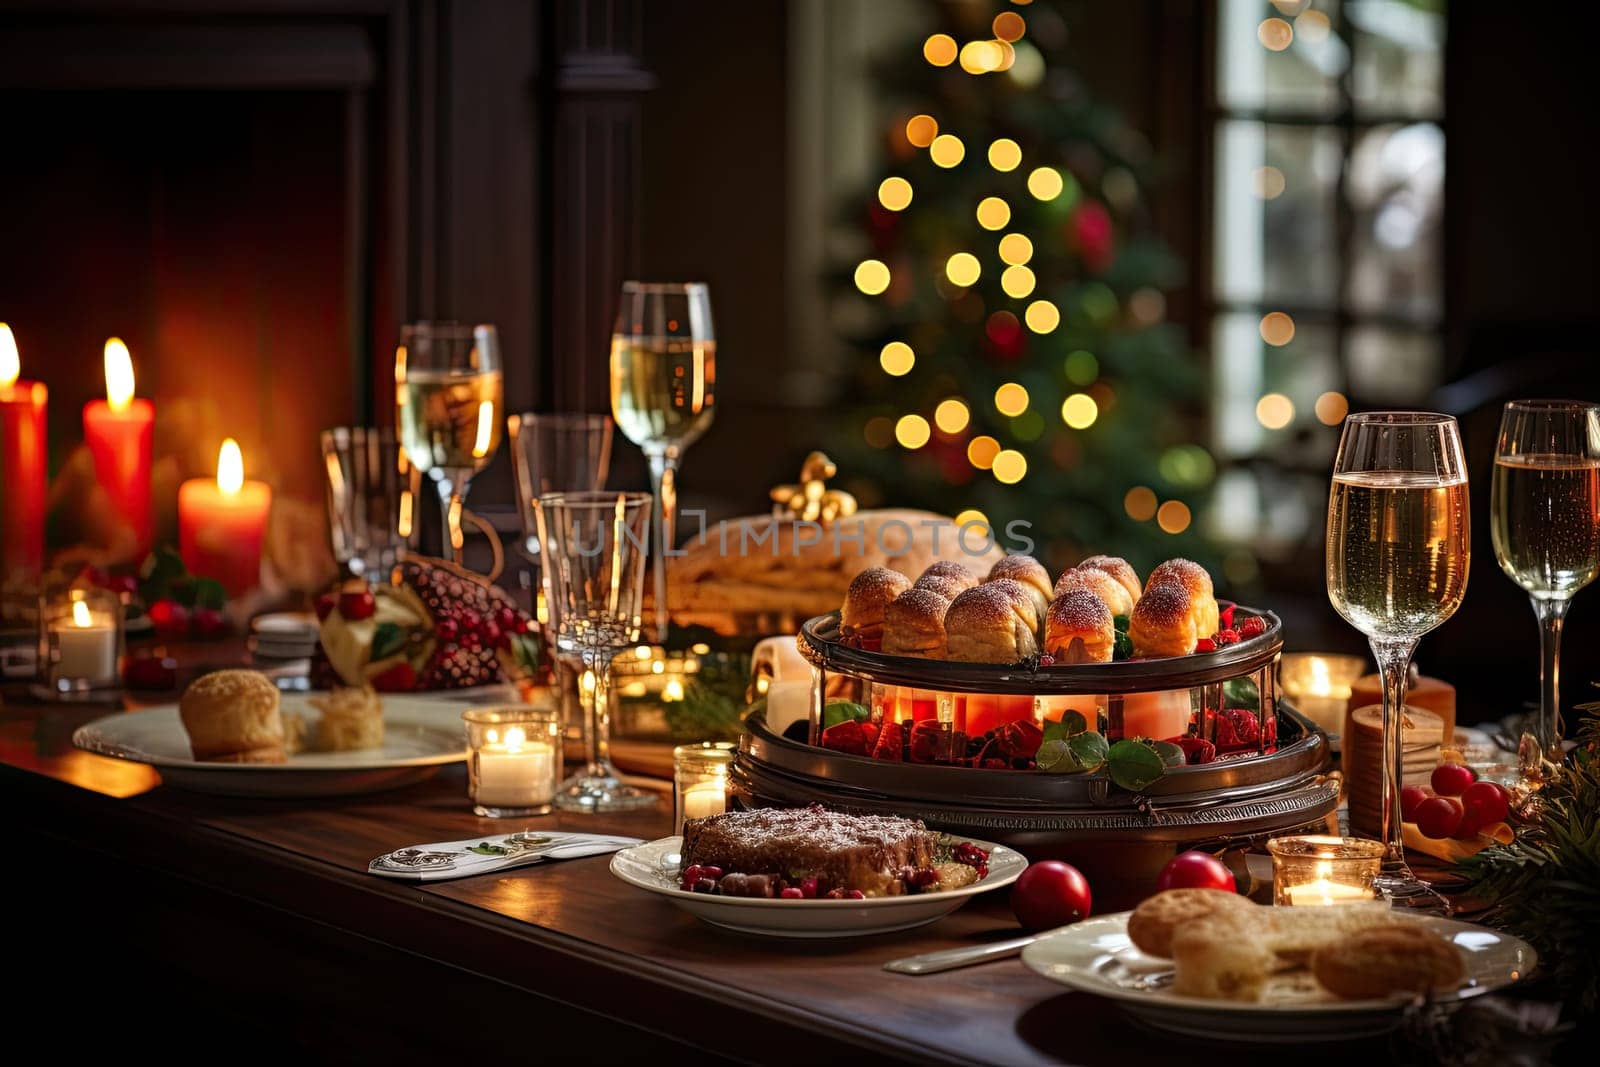 A Festive Holiday Dinner Table Set with Candles, Delicious Food, and Warm Atmosphere